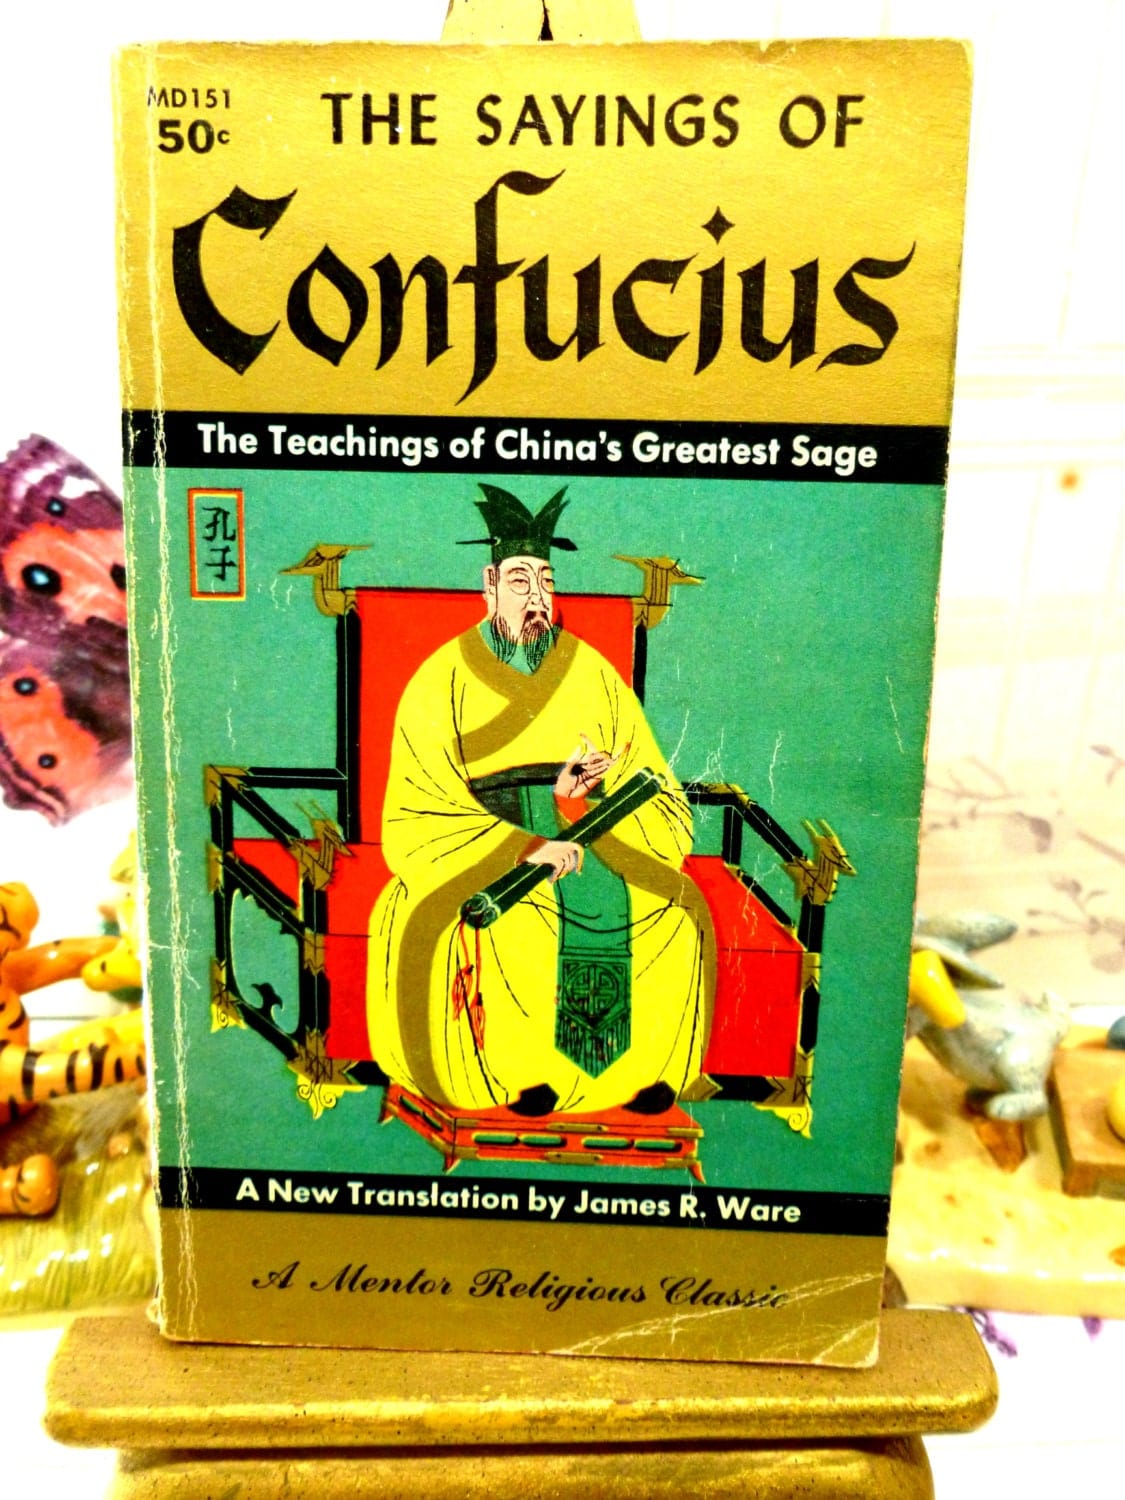 The Sayings of Confucius Vintage Paperback Book Chinese Philosophy Ancient China's Wisest Man 1950s